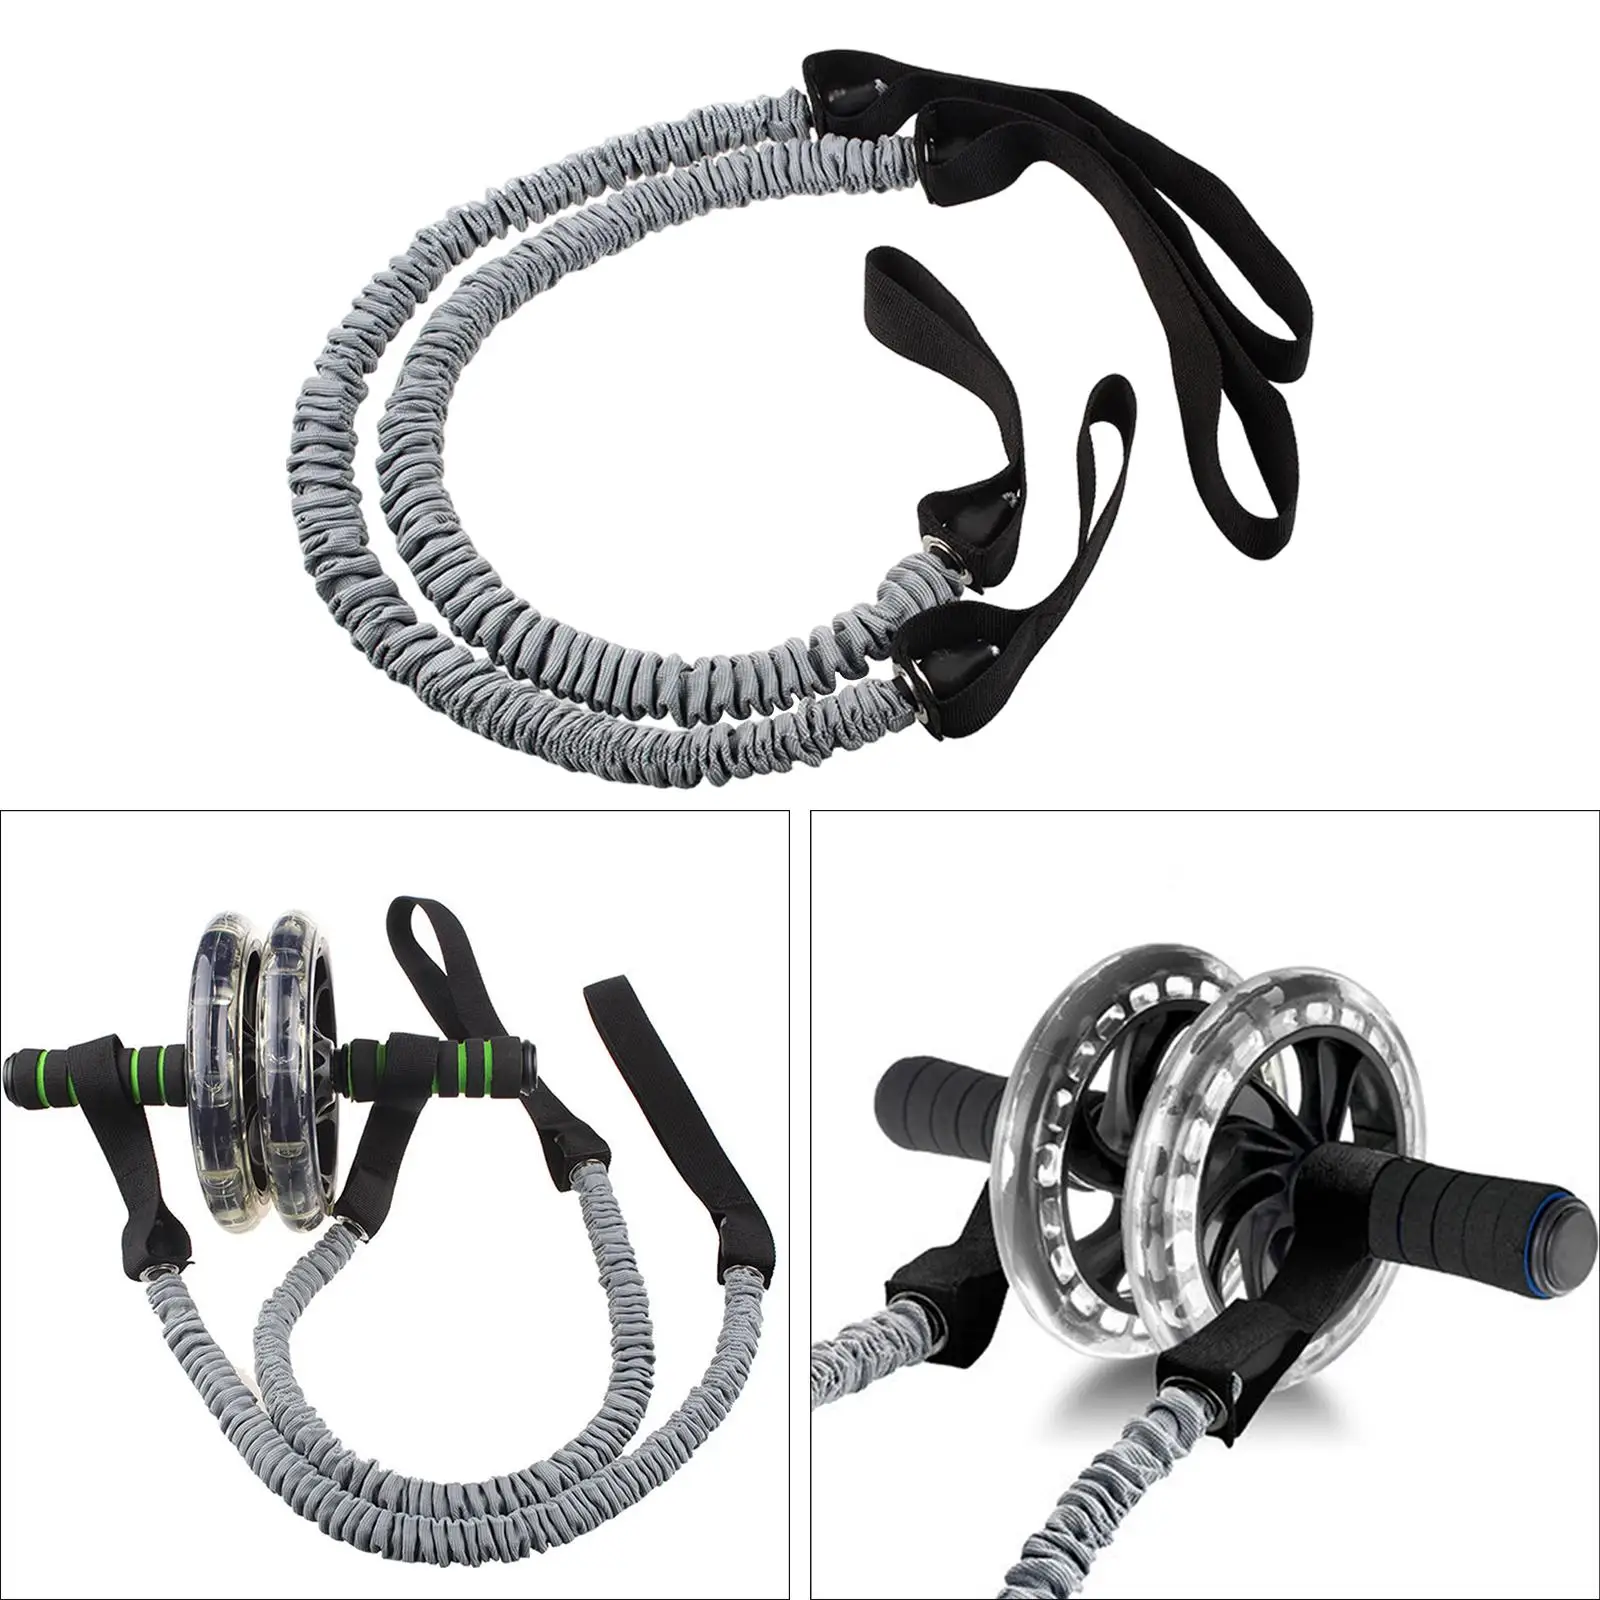 1 Pair Abdominal Roller Wheel Elastic Pull Rope Stretching Muscle Building Resistance Bands for Arms Back Legs Stretching